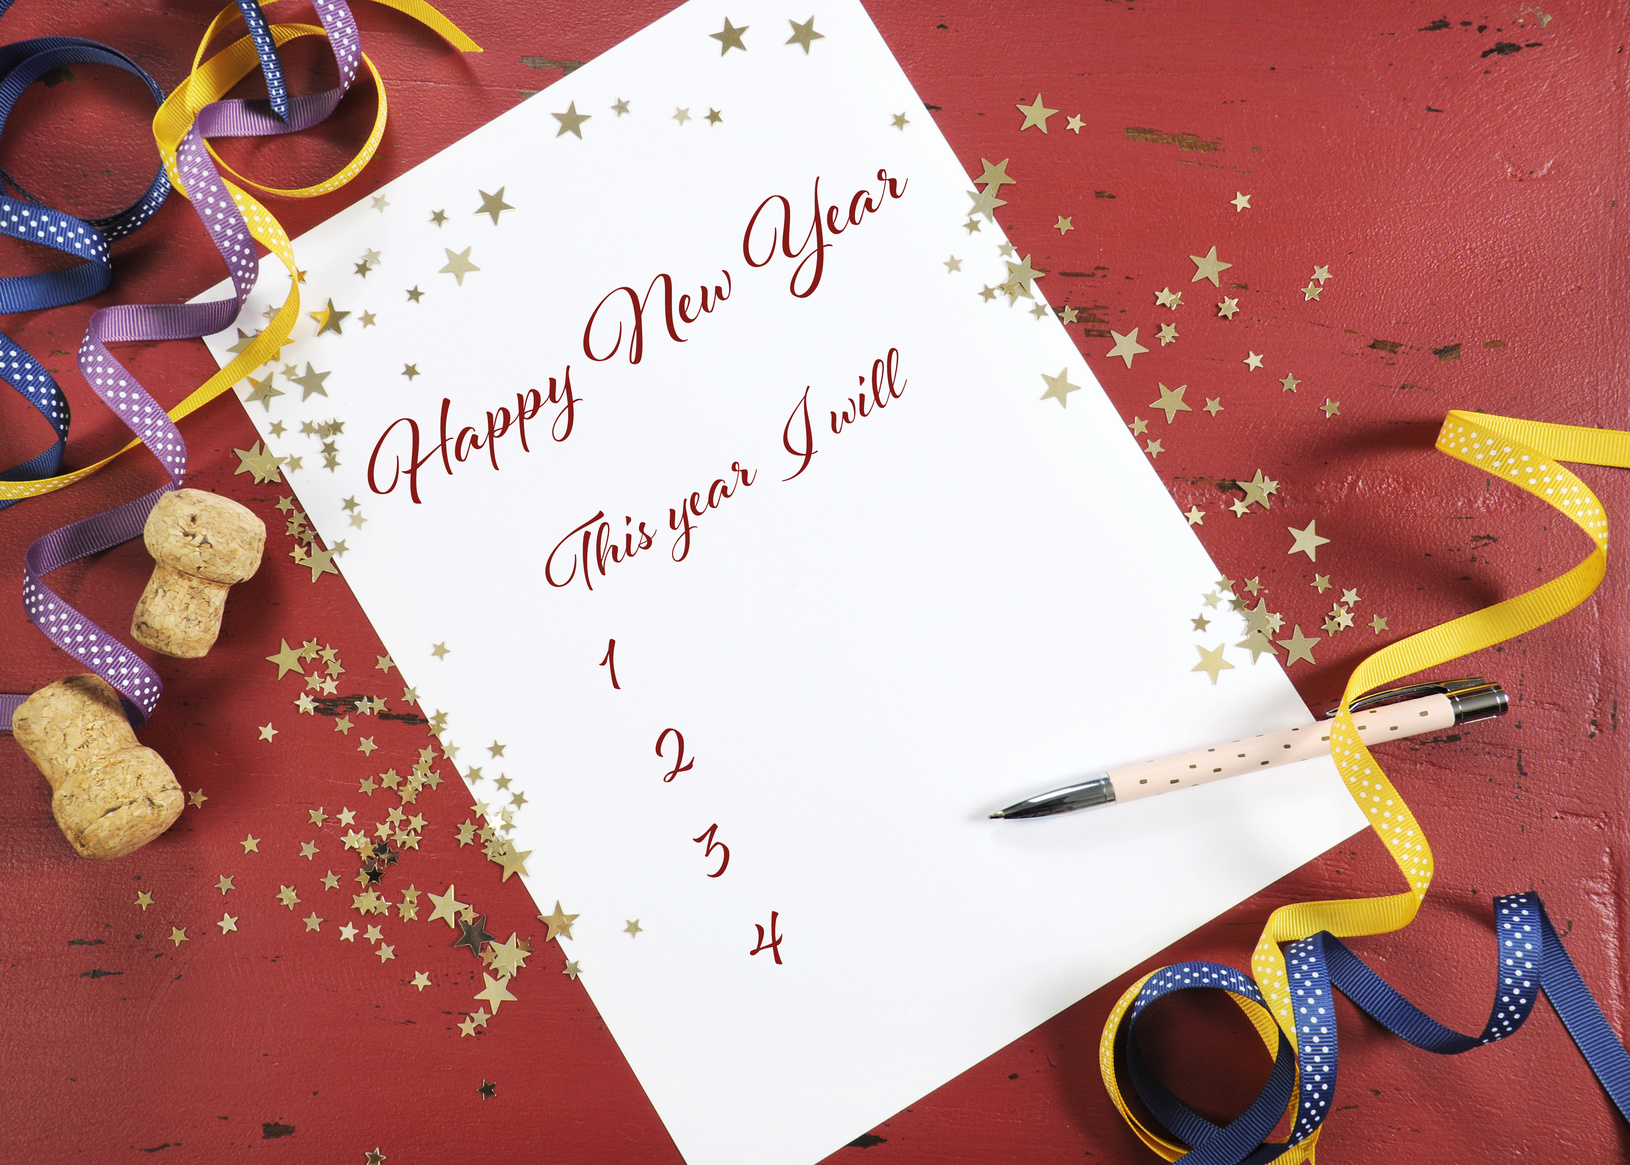 New Year's Resolutions for your Pelvic Floor